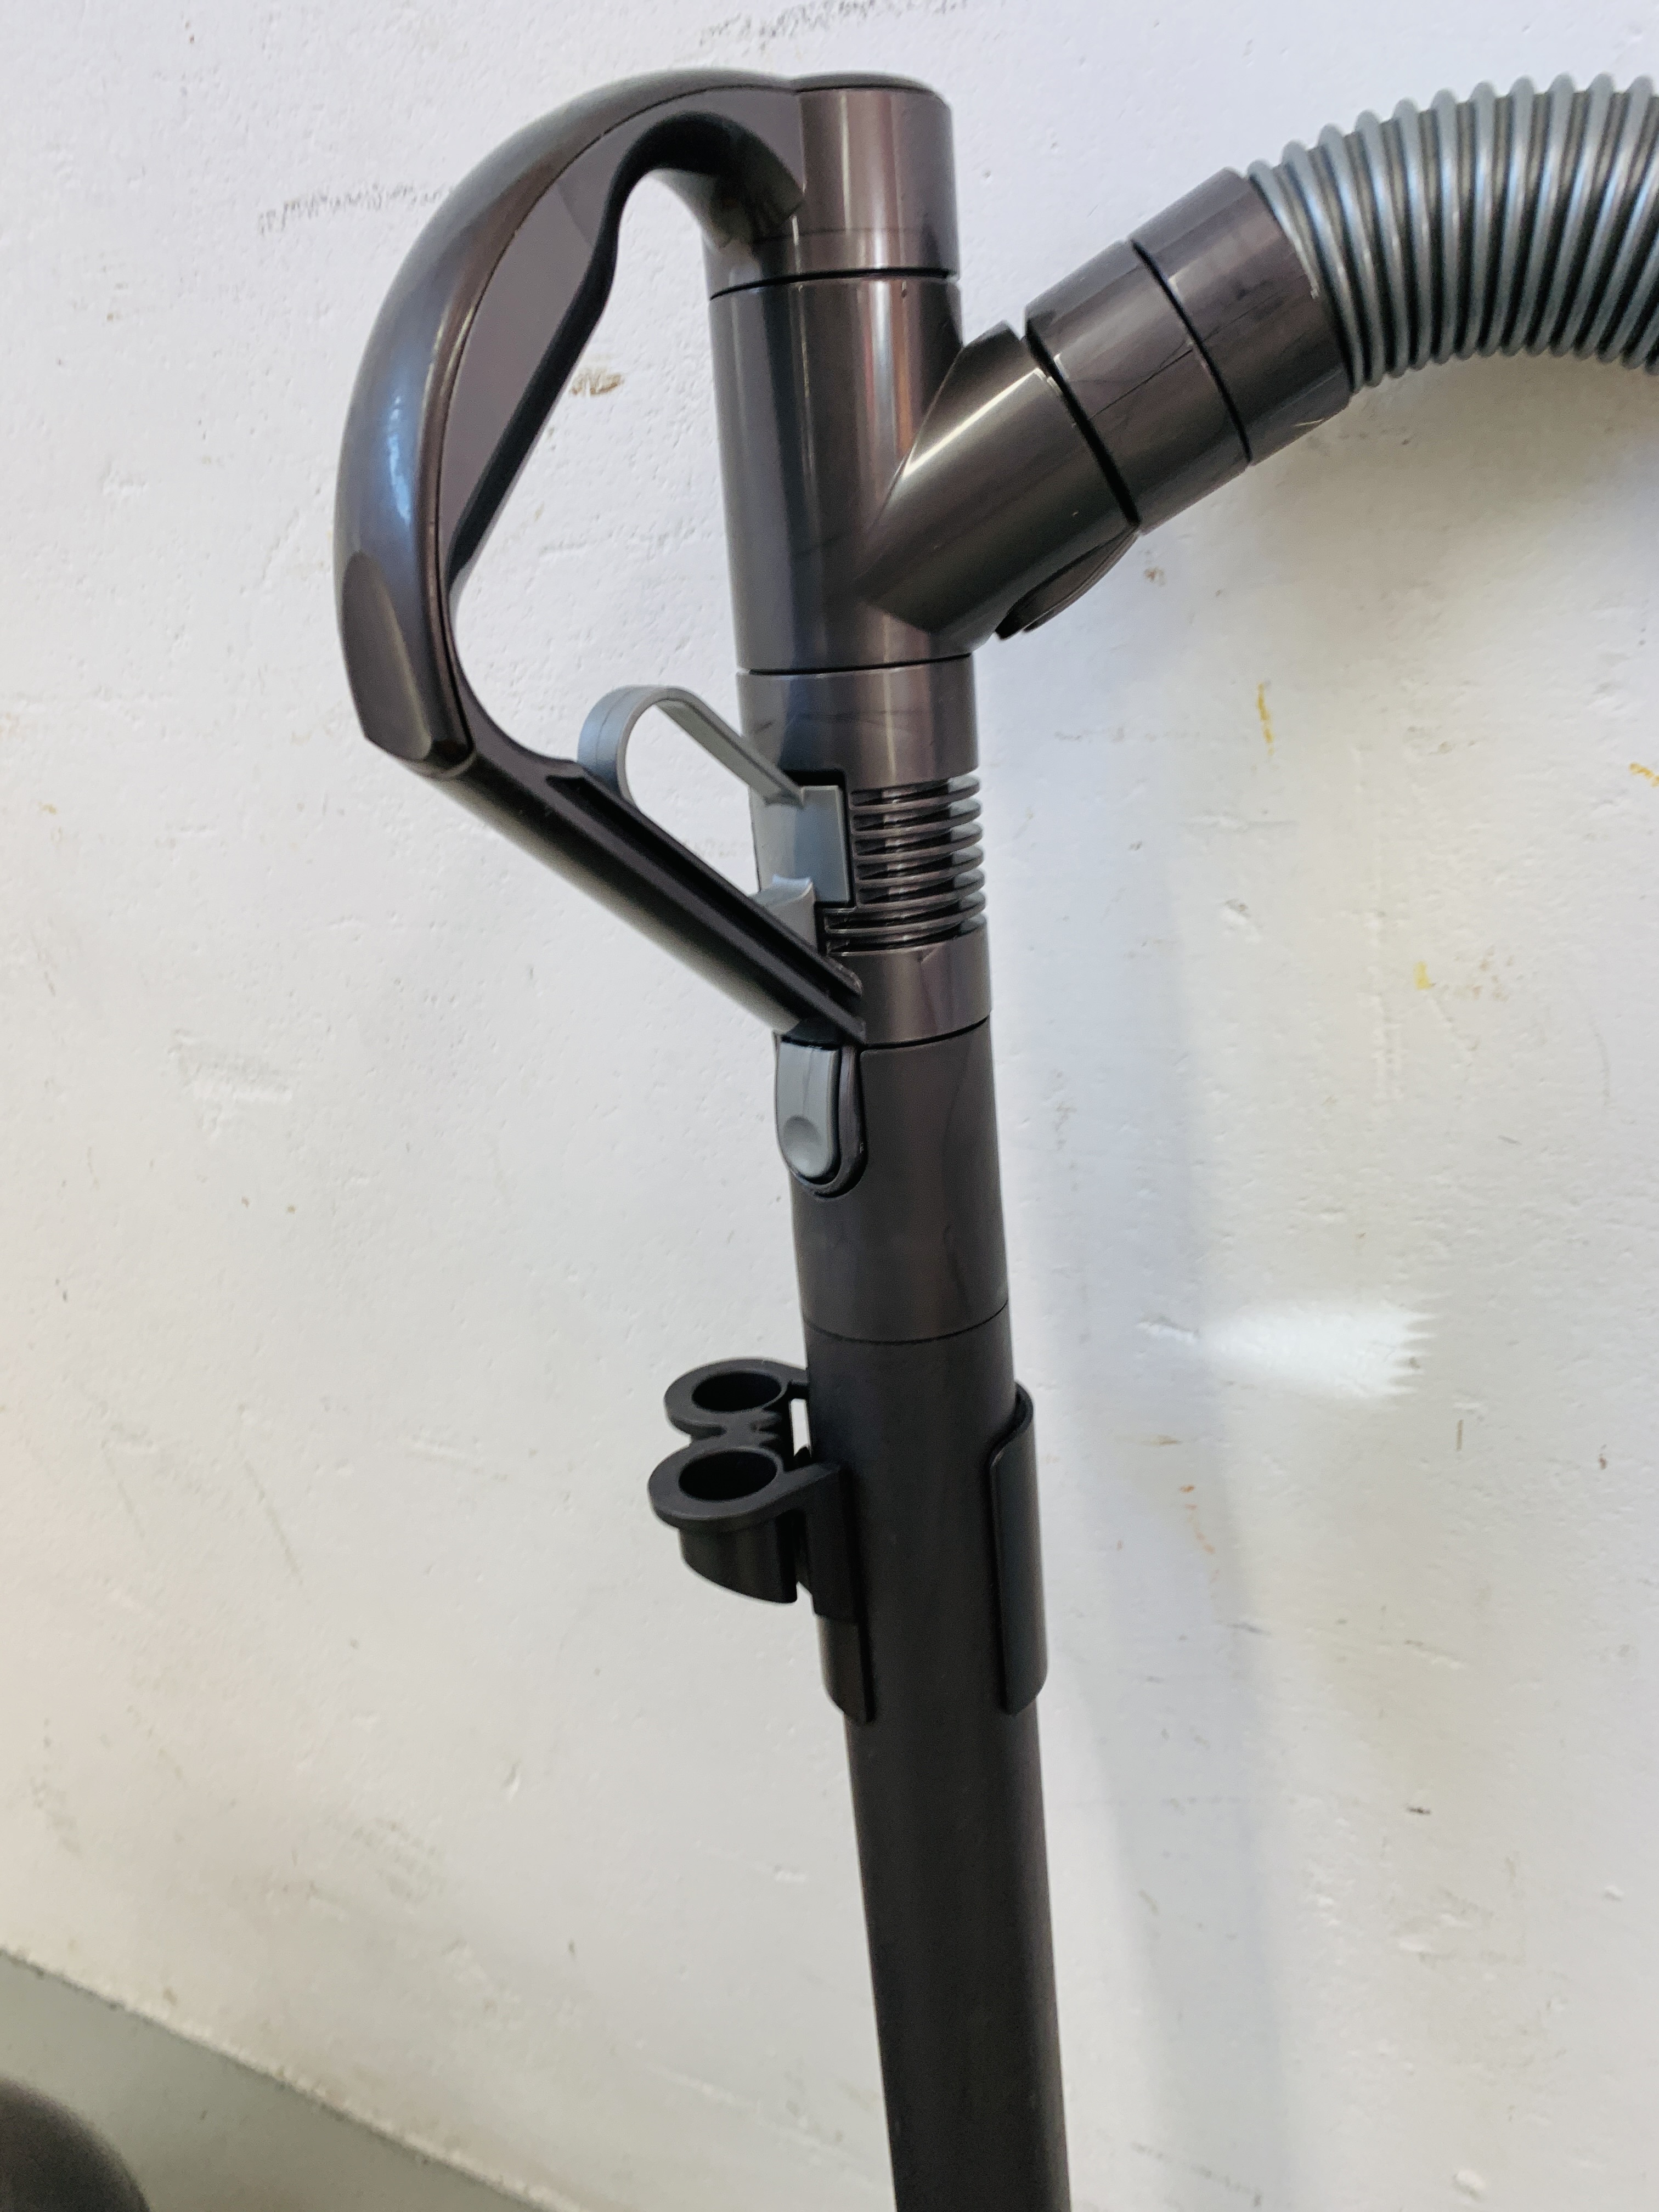 A DYSON DC39 VACUUM CLEANER - SOLD AS SEEN - Image 4 of 5